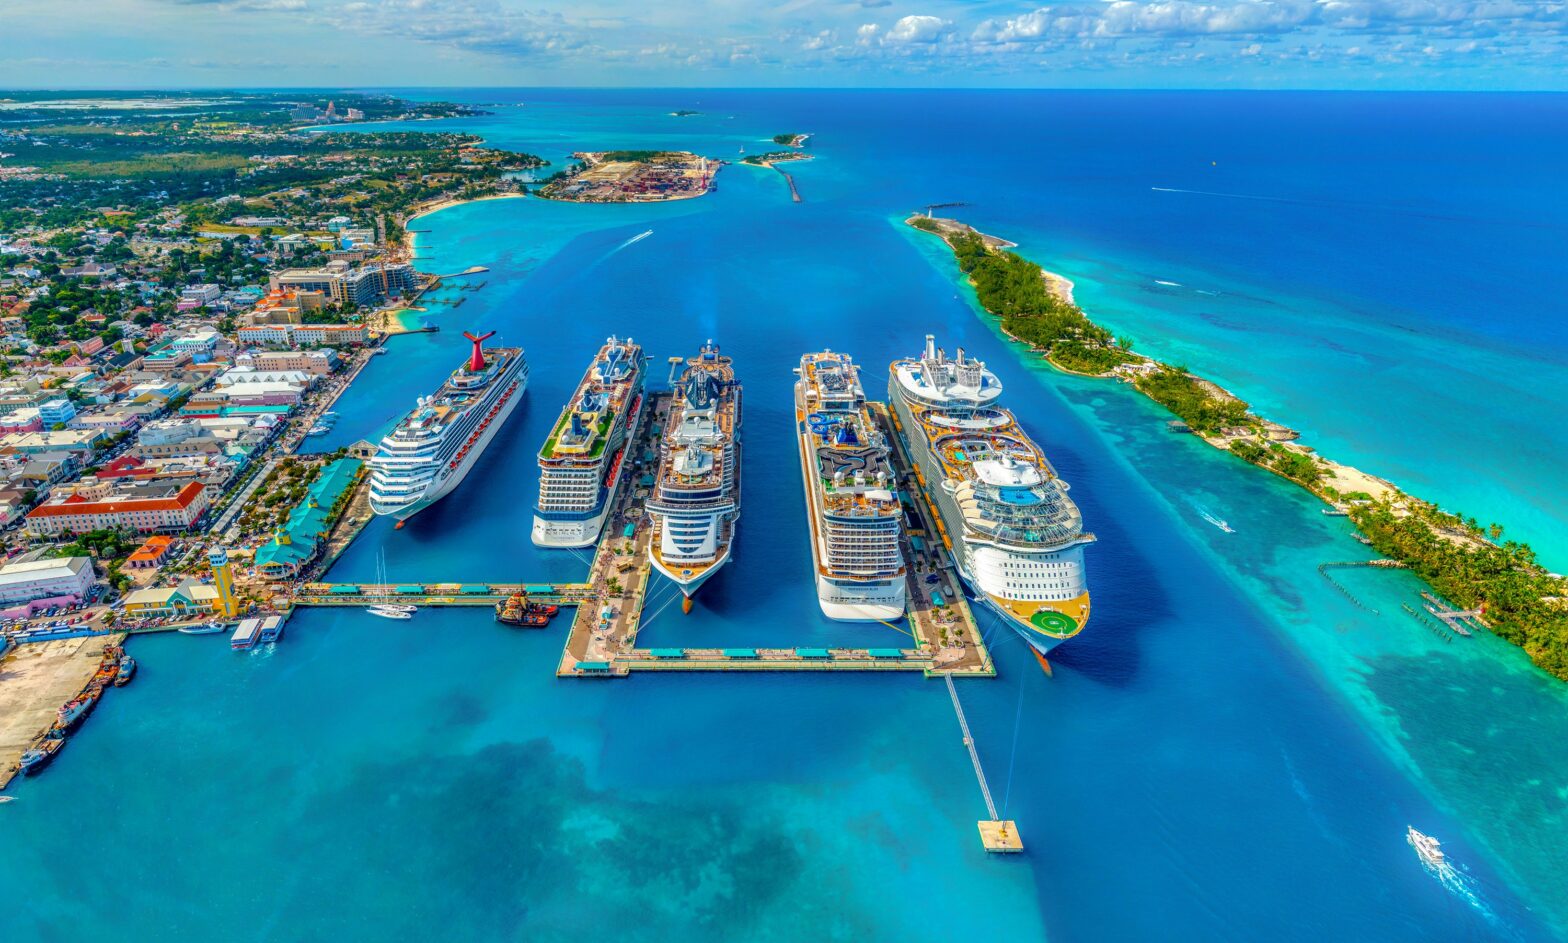 The Nassau Cruise Port: Travel Tips and Things To Do